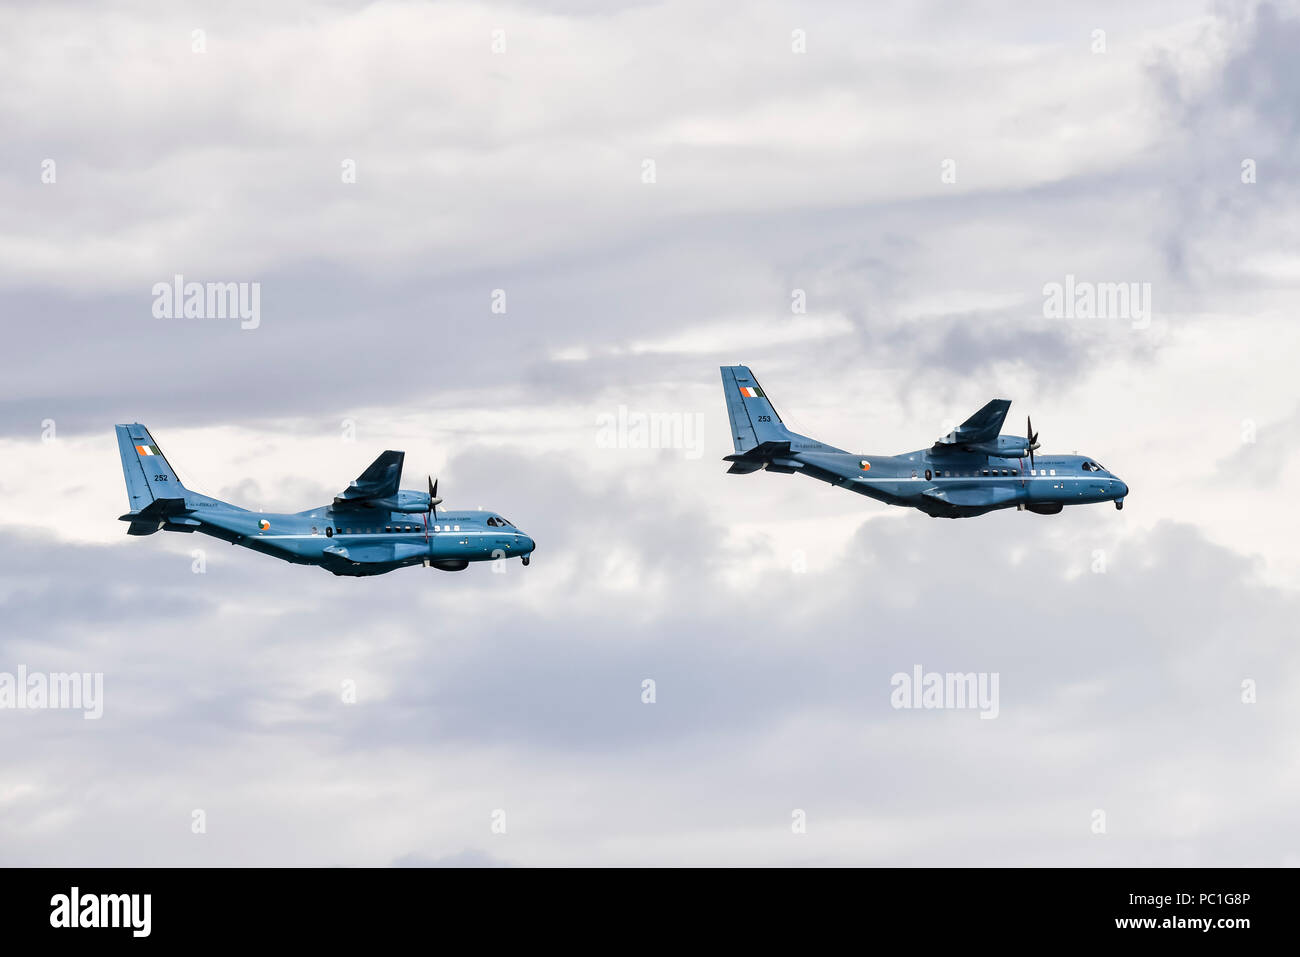 Two CASA CN-235 Maritime Patrol Aircraft belonging to the Irish Air Corps flying together in close formation. Stock Photo